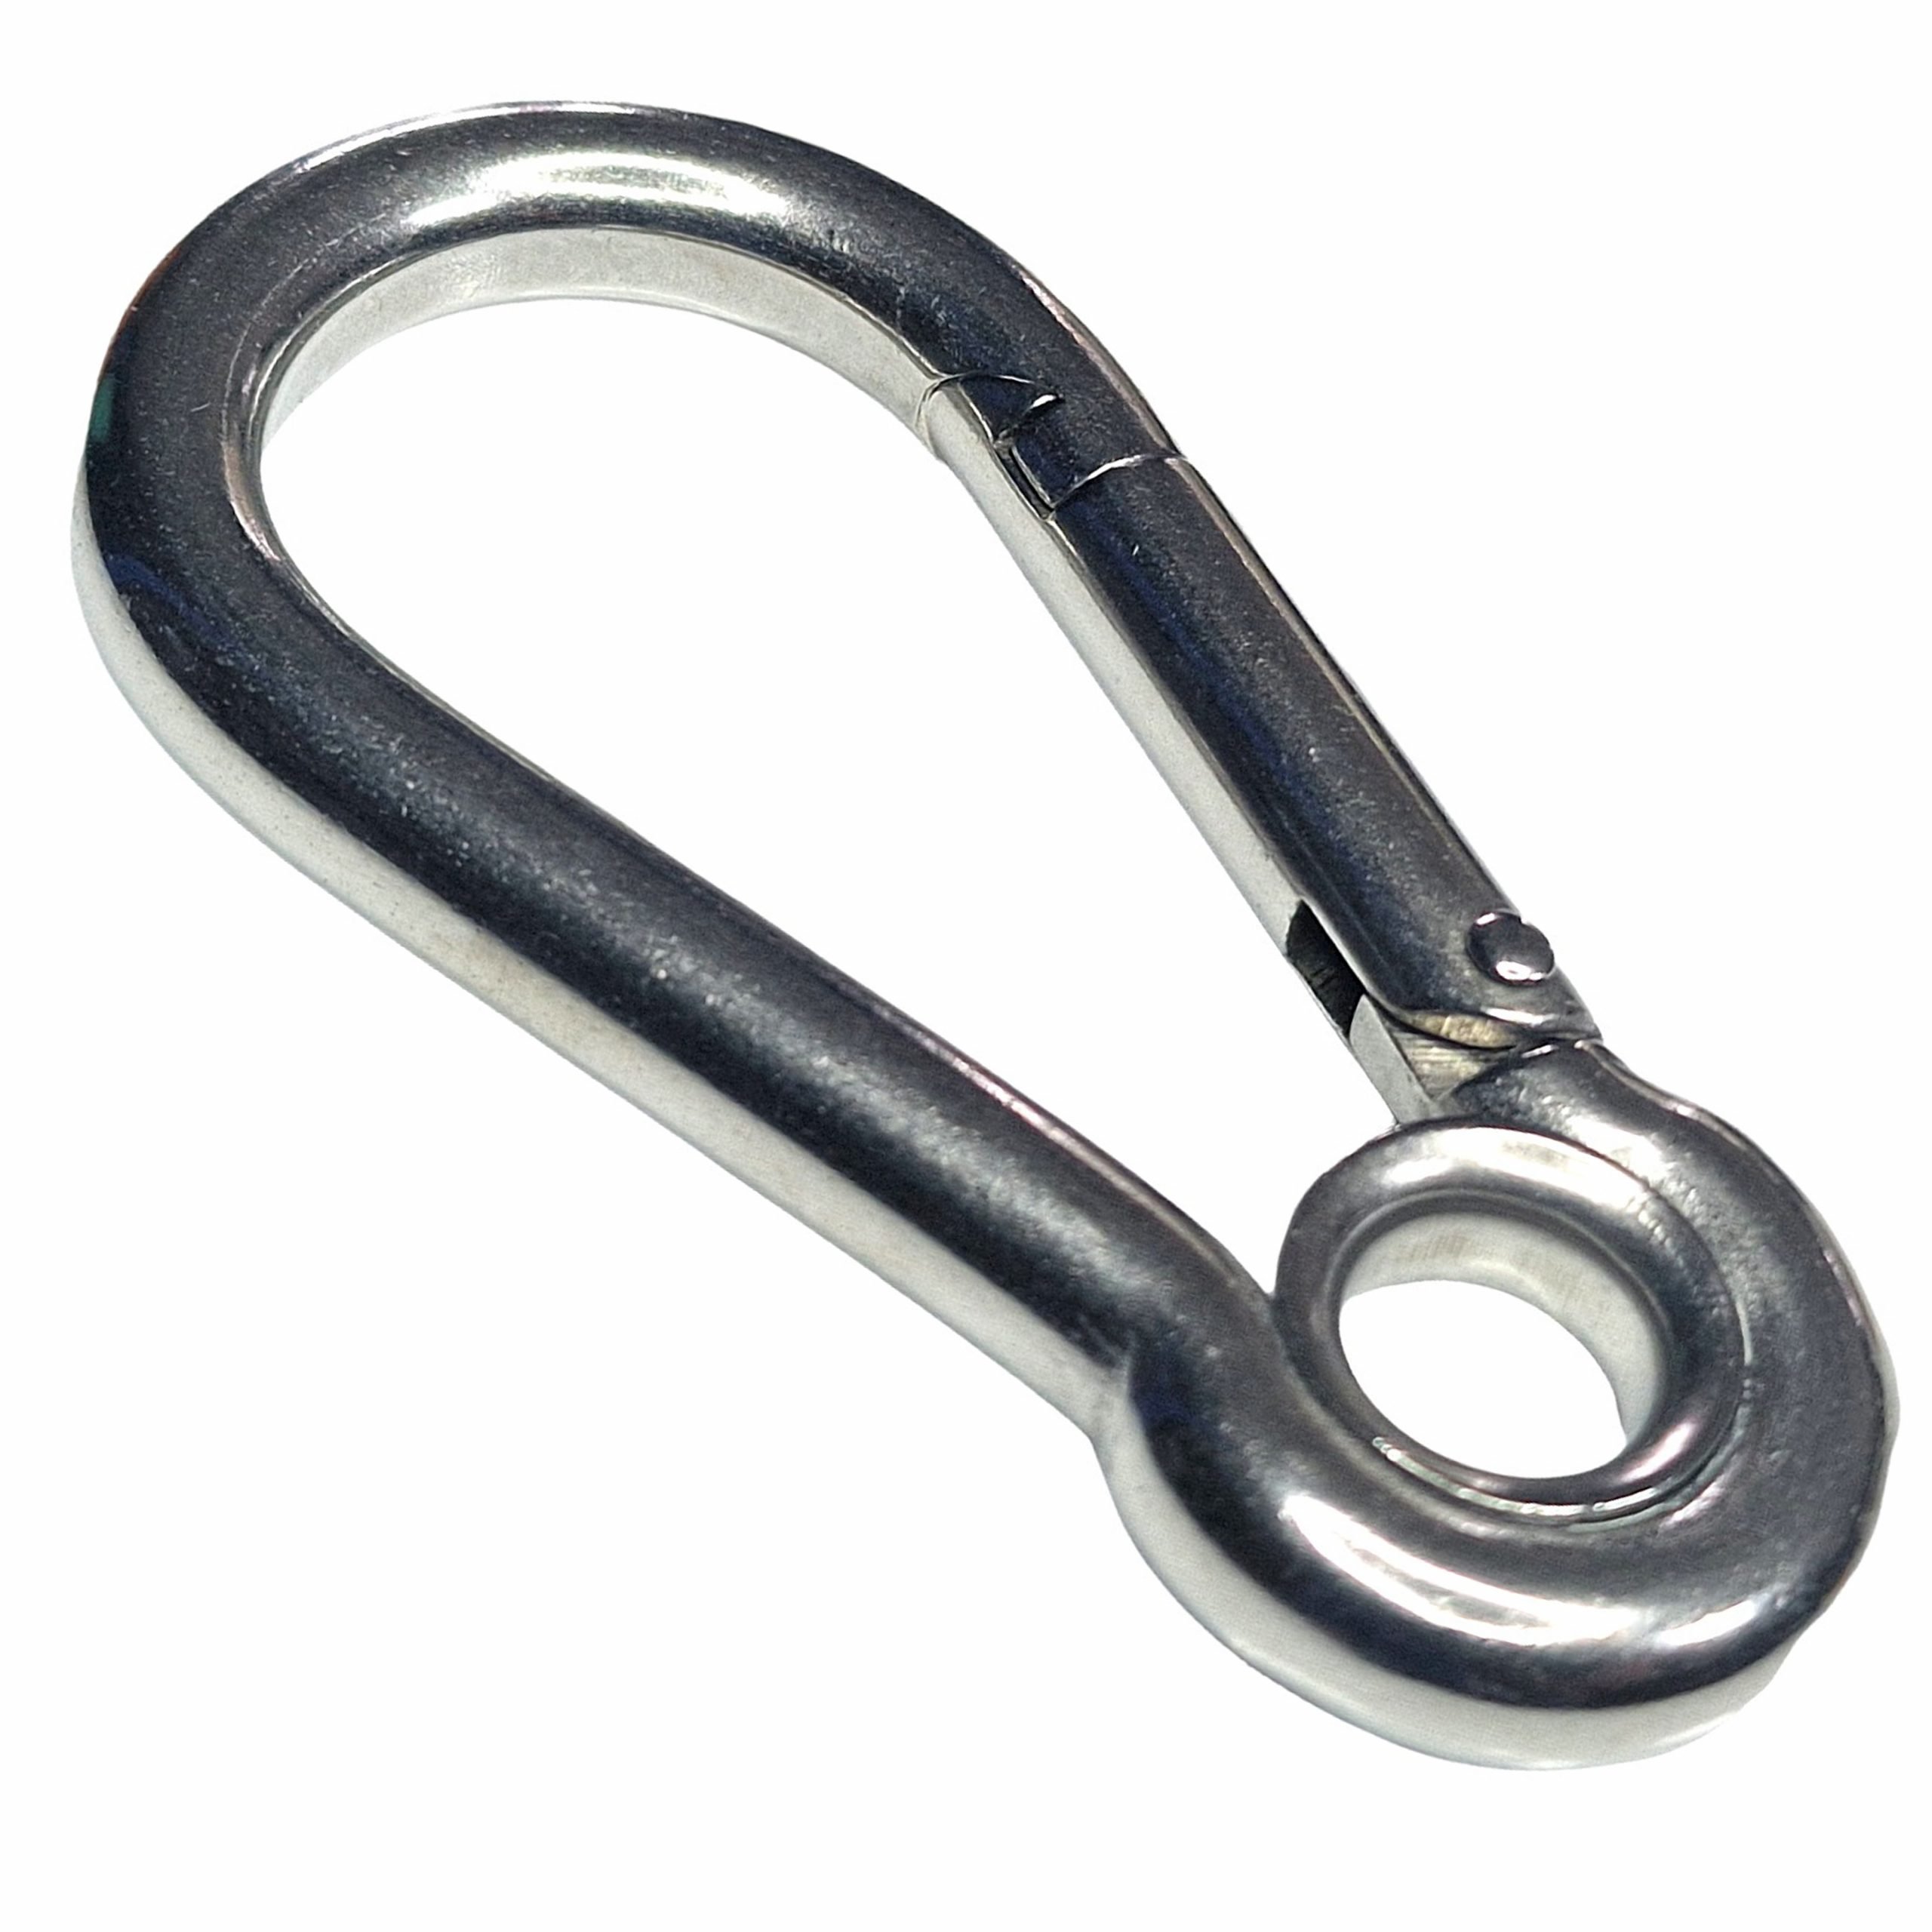 Stainless Steel Locking Carabiner Clip Heavy Duty Snap Hook For Items  Holding Application: Hardware at Best Price in Jamnagar